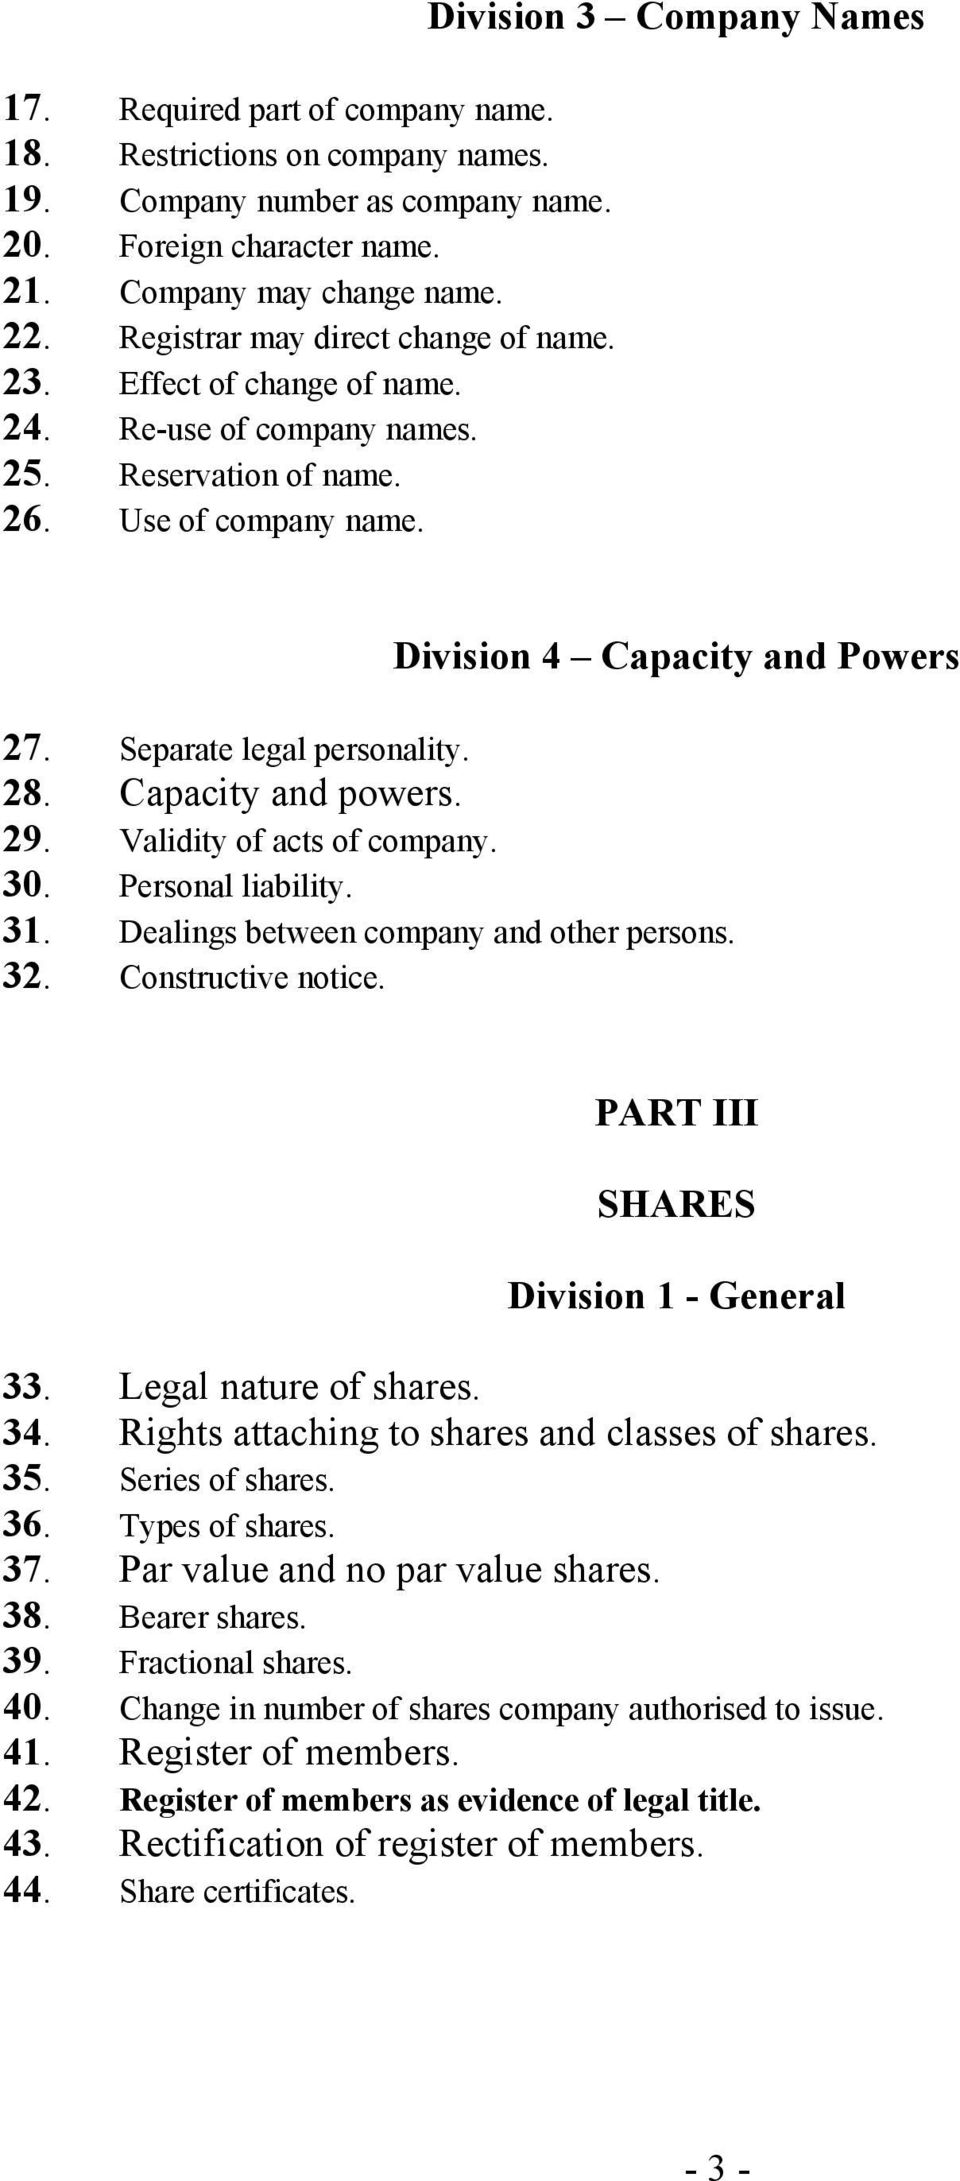 Division 3 Company Names Division 4 Capacity and Powers 27. Separate legal personality. 28. Capacity and powers. 29. Validity of acts of company. 30. Personal liability. 31.